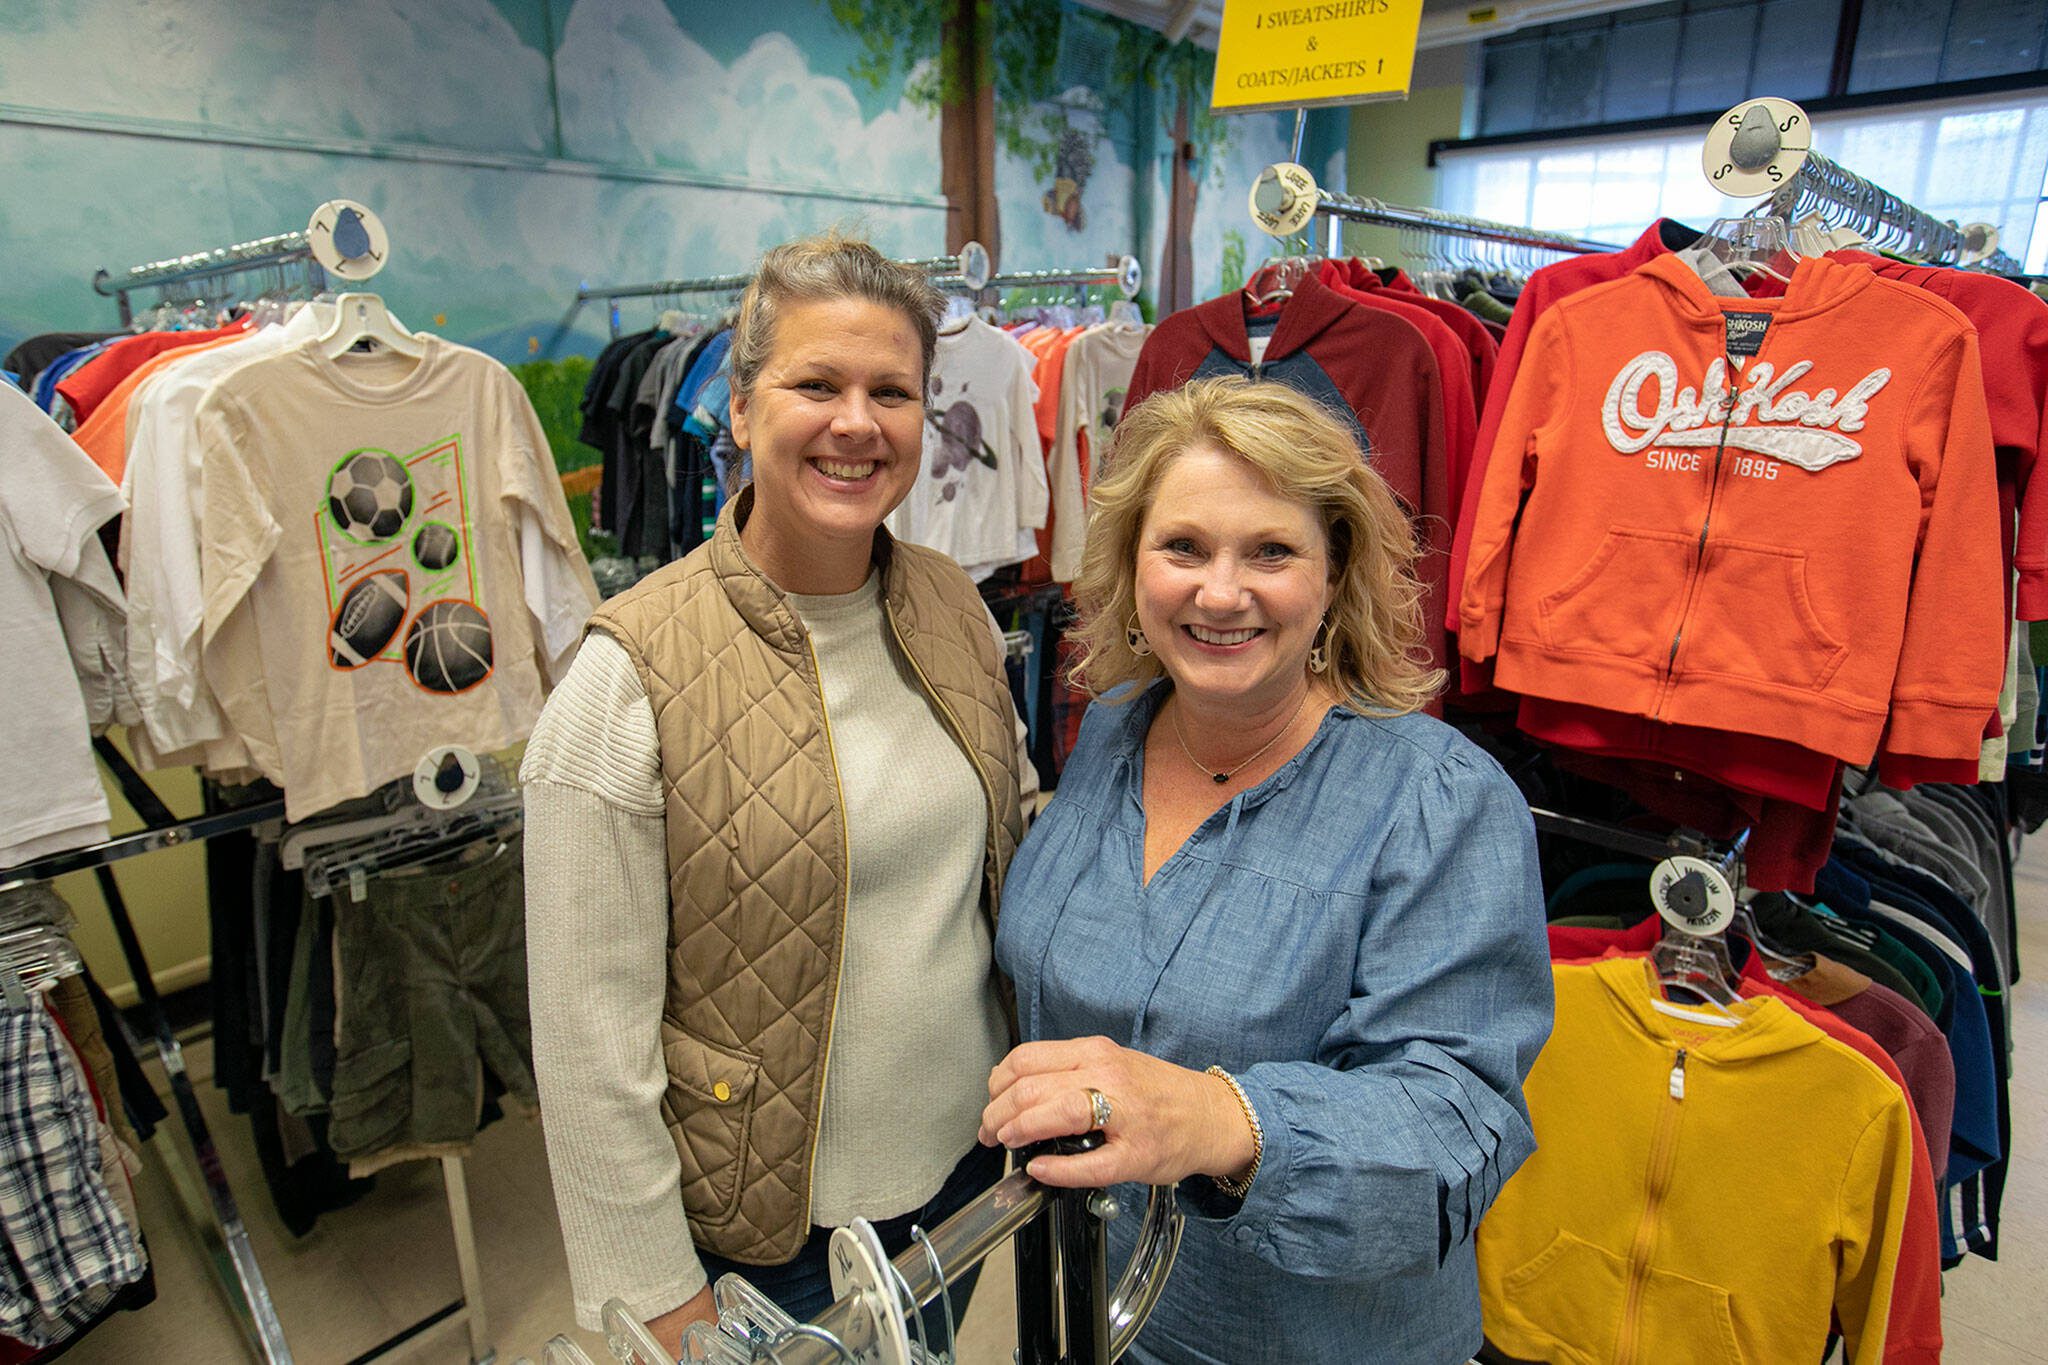 Site Manager LaCrissa Spencer and Director and Cofounder Kimberly Meno stand together among shirts and jackets at Arlington Kids’ Kloset on Nov. 17, in Arlington. (Ryan Berry / The Herald)